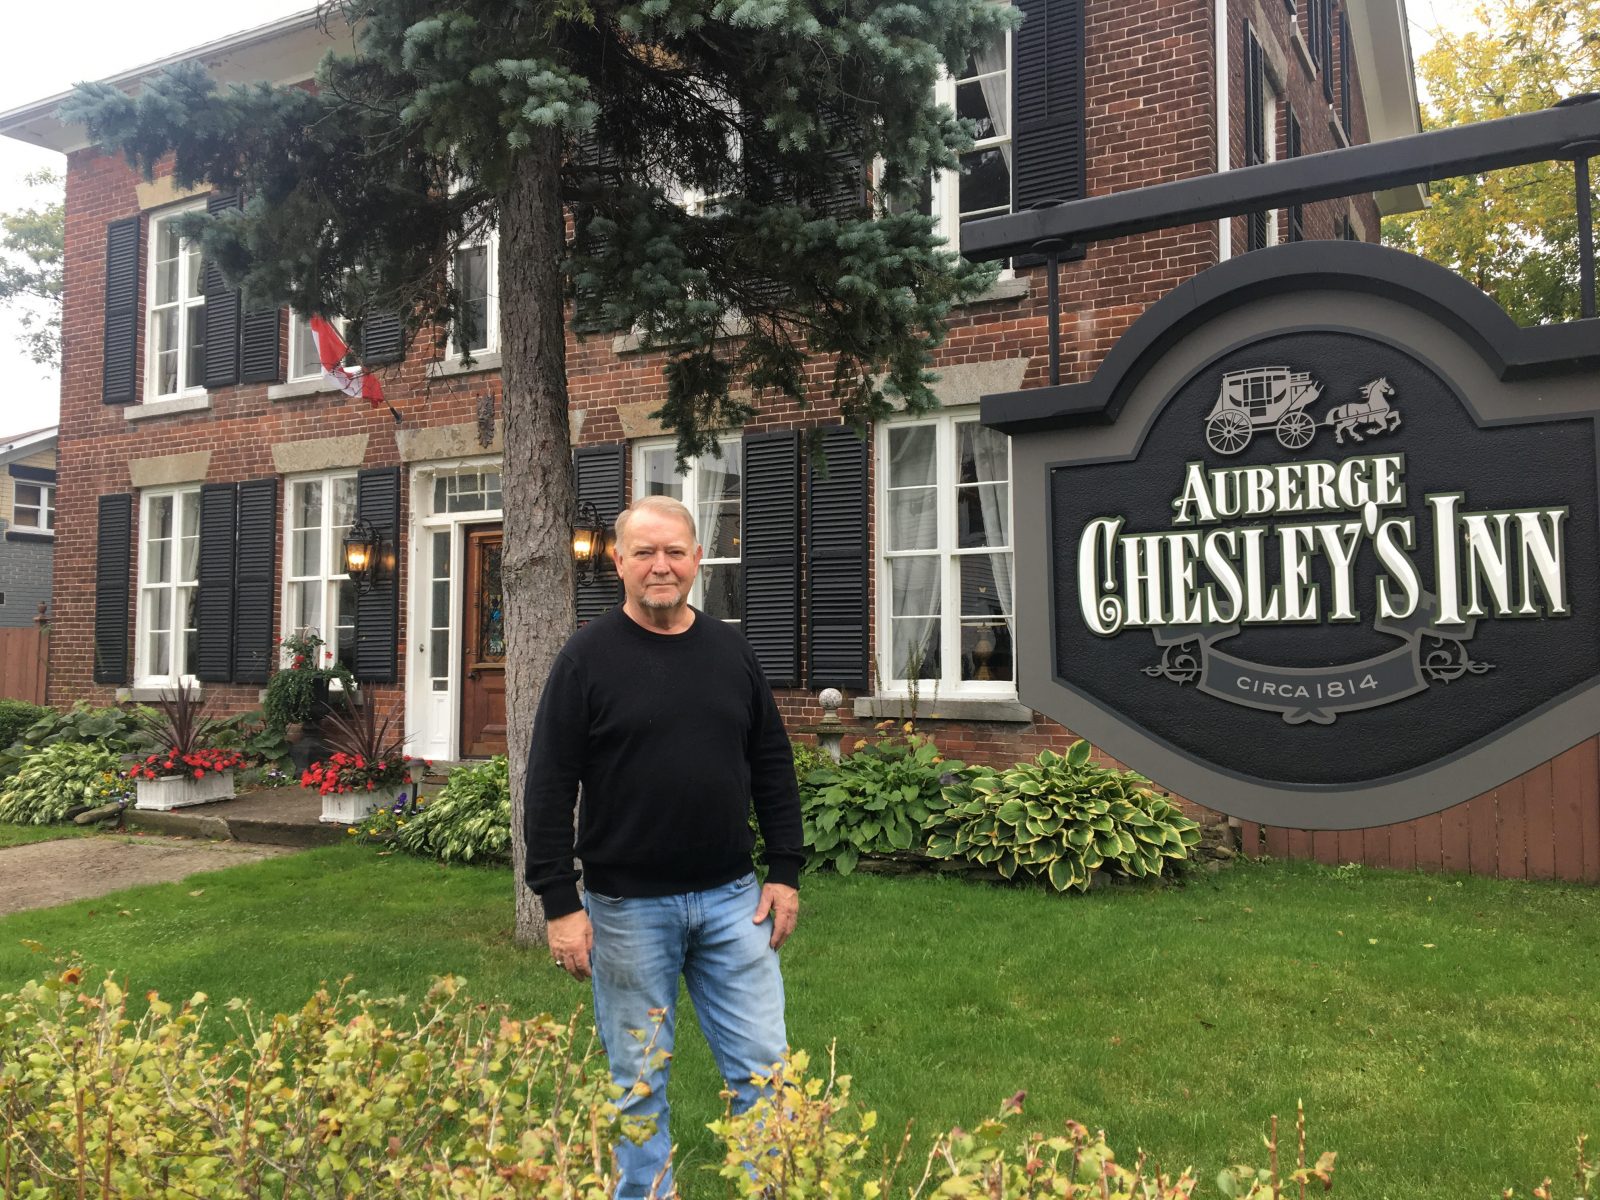 Auberge Chesley’s Inn wins transformative project award